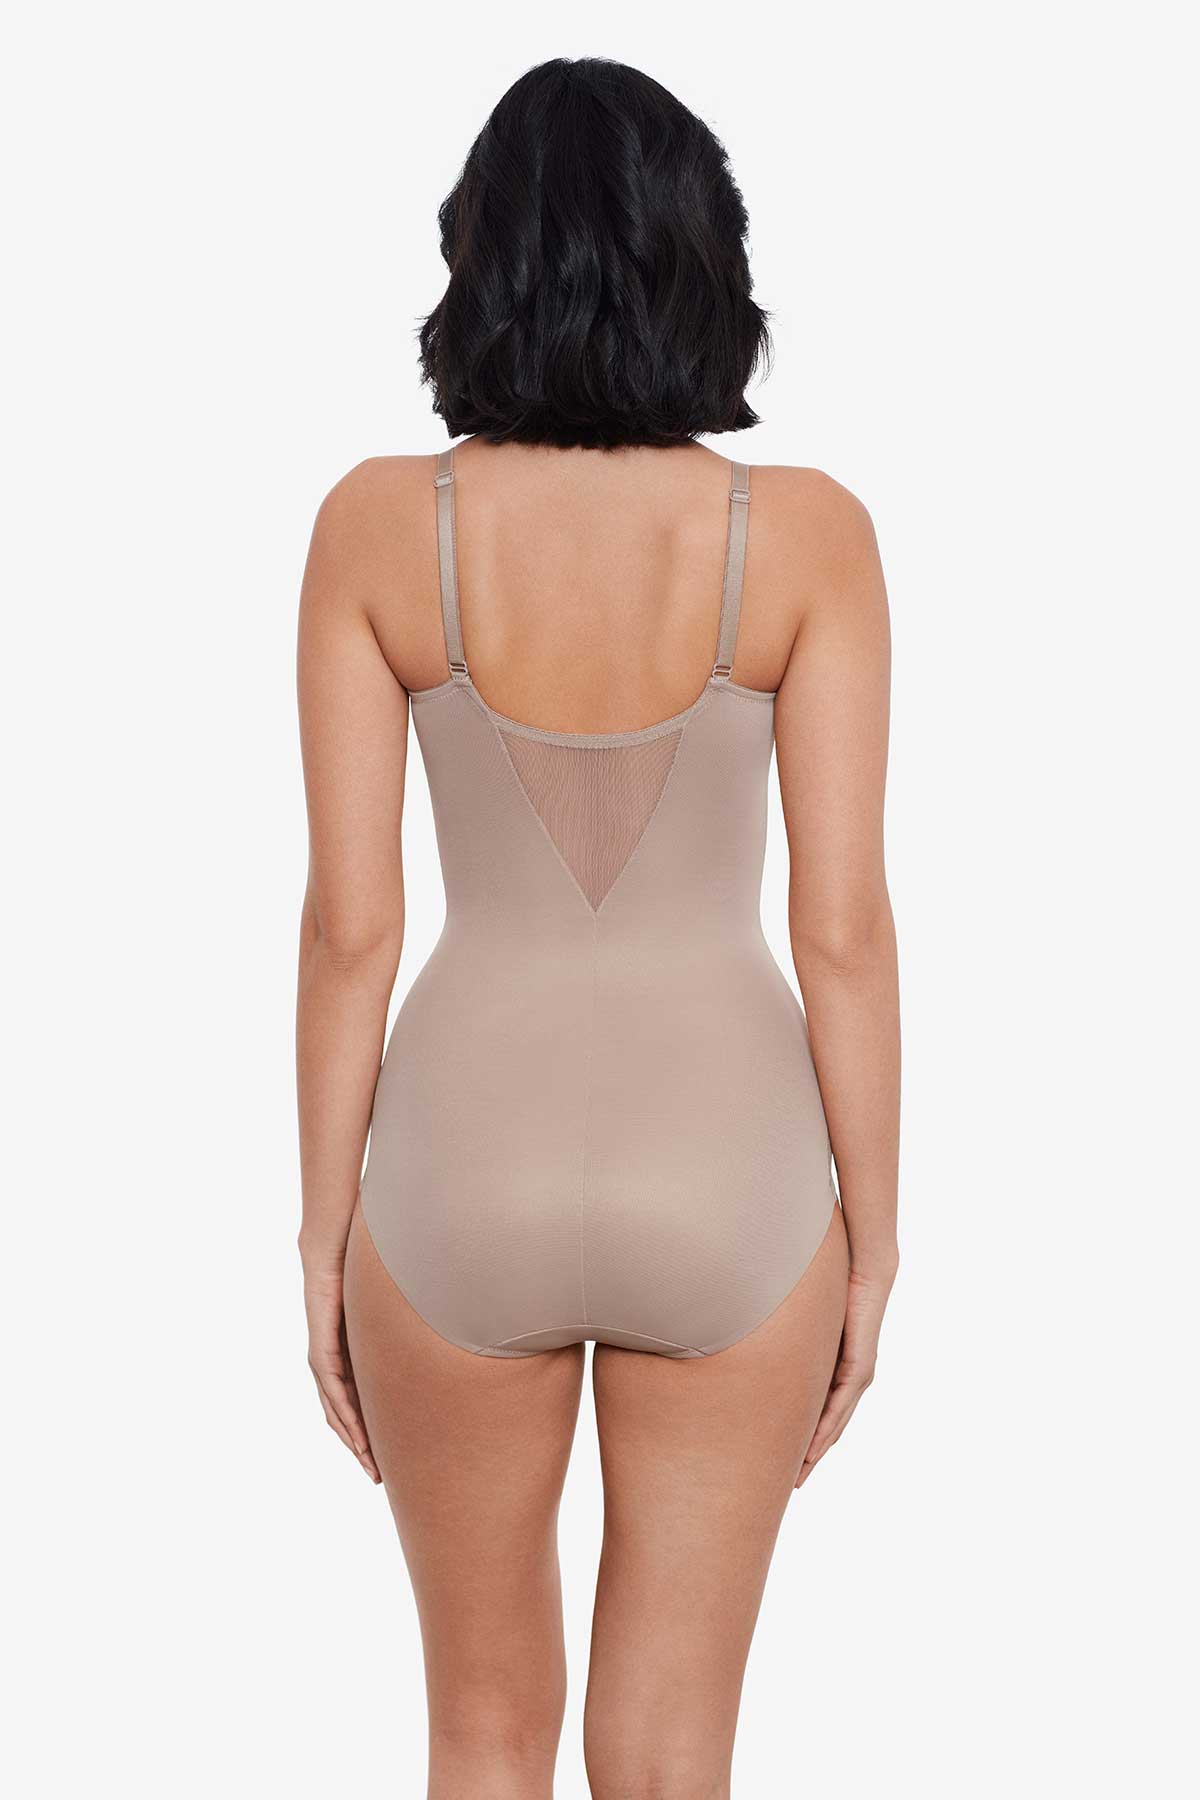 Miraclesuit Women's Extra Firm Tummy-control Sheer Trim Bodysuit 2783 In  Stucco (nude )